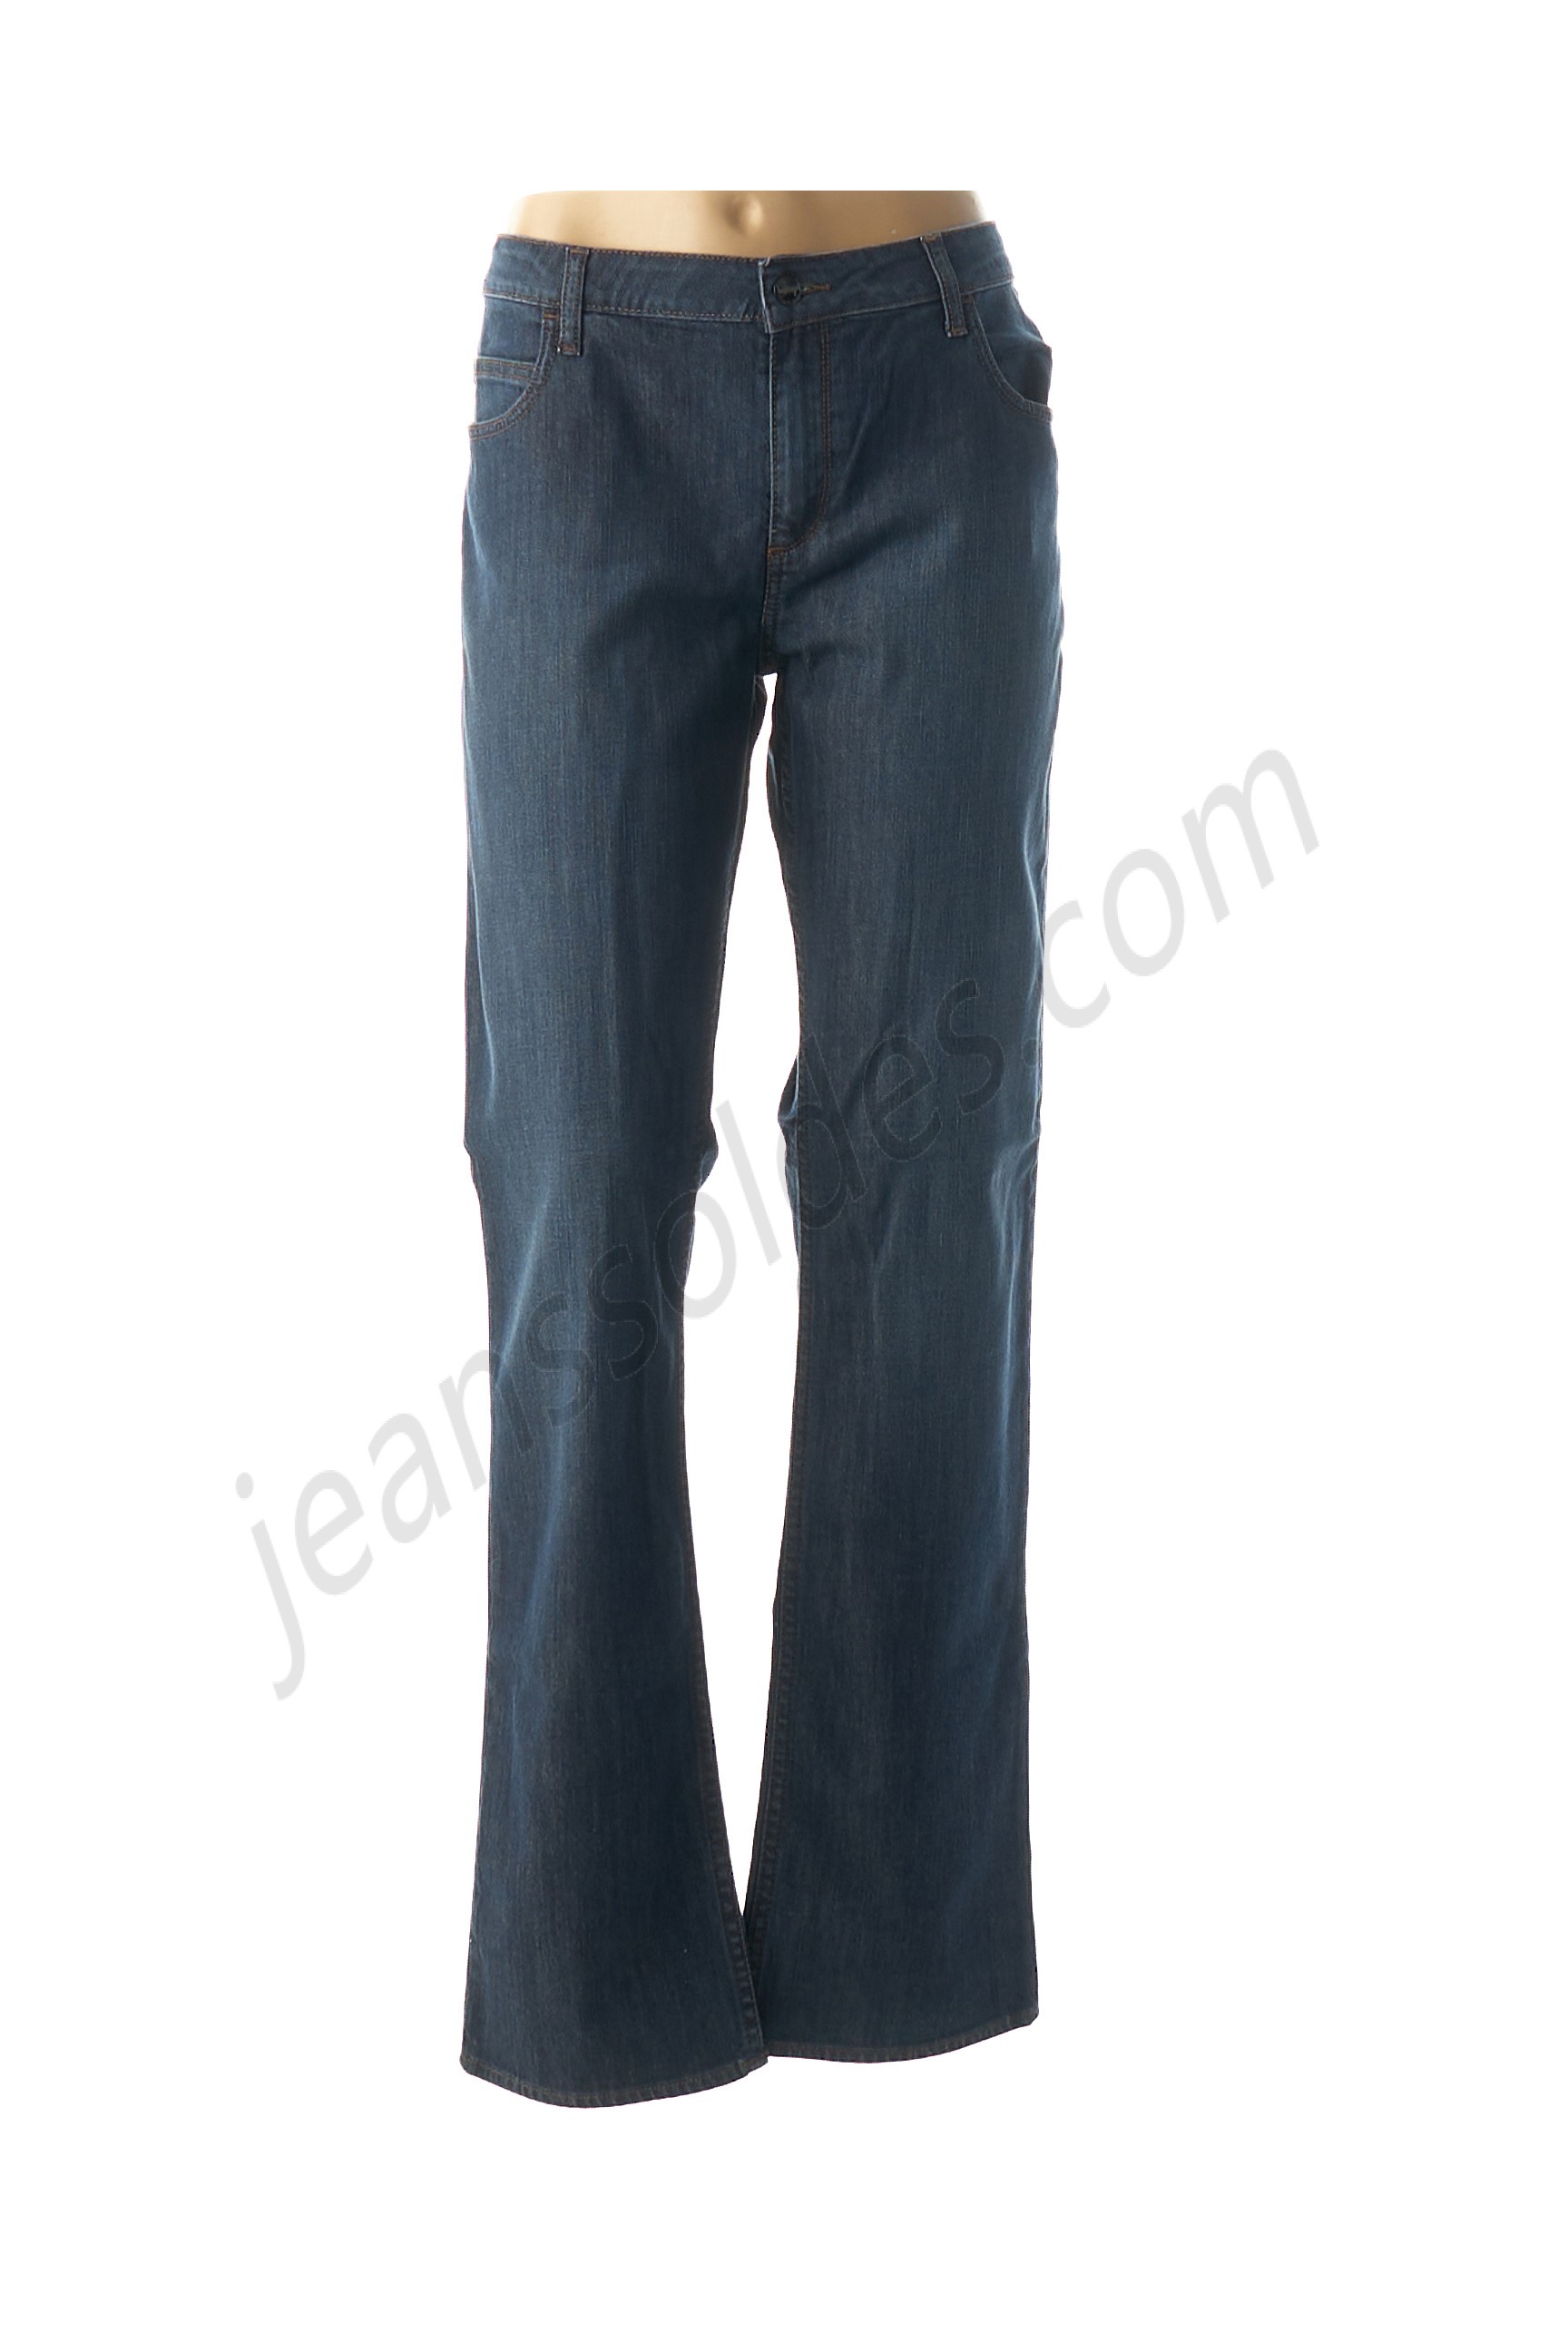 kanope-Jeans coupe droite prix d’amis - kanope-Jeans coupe droite prix d’amis